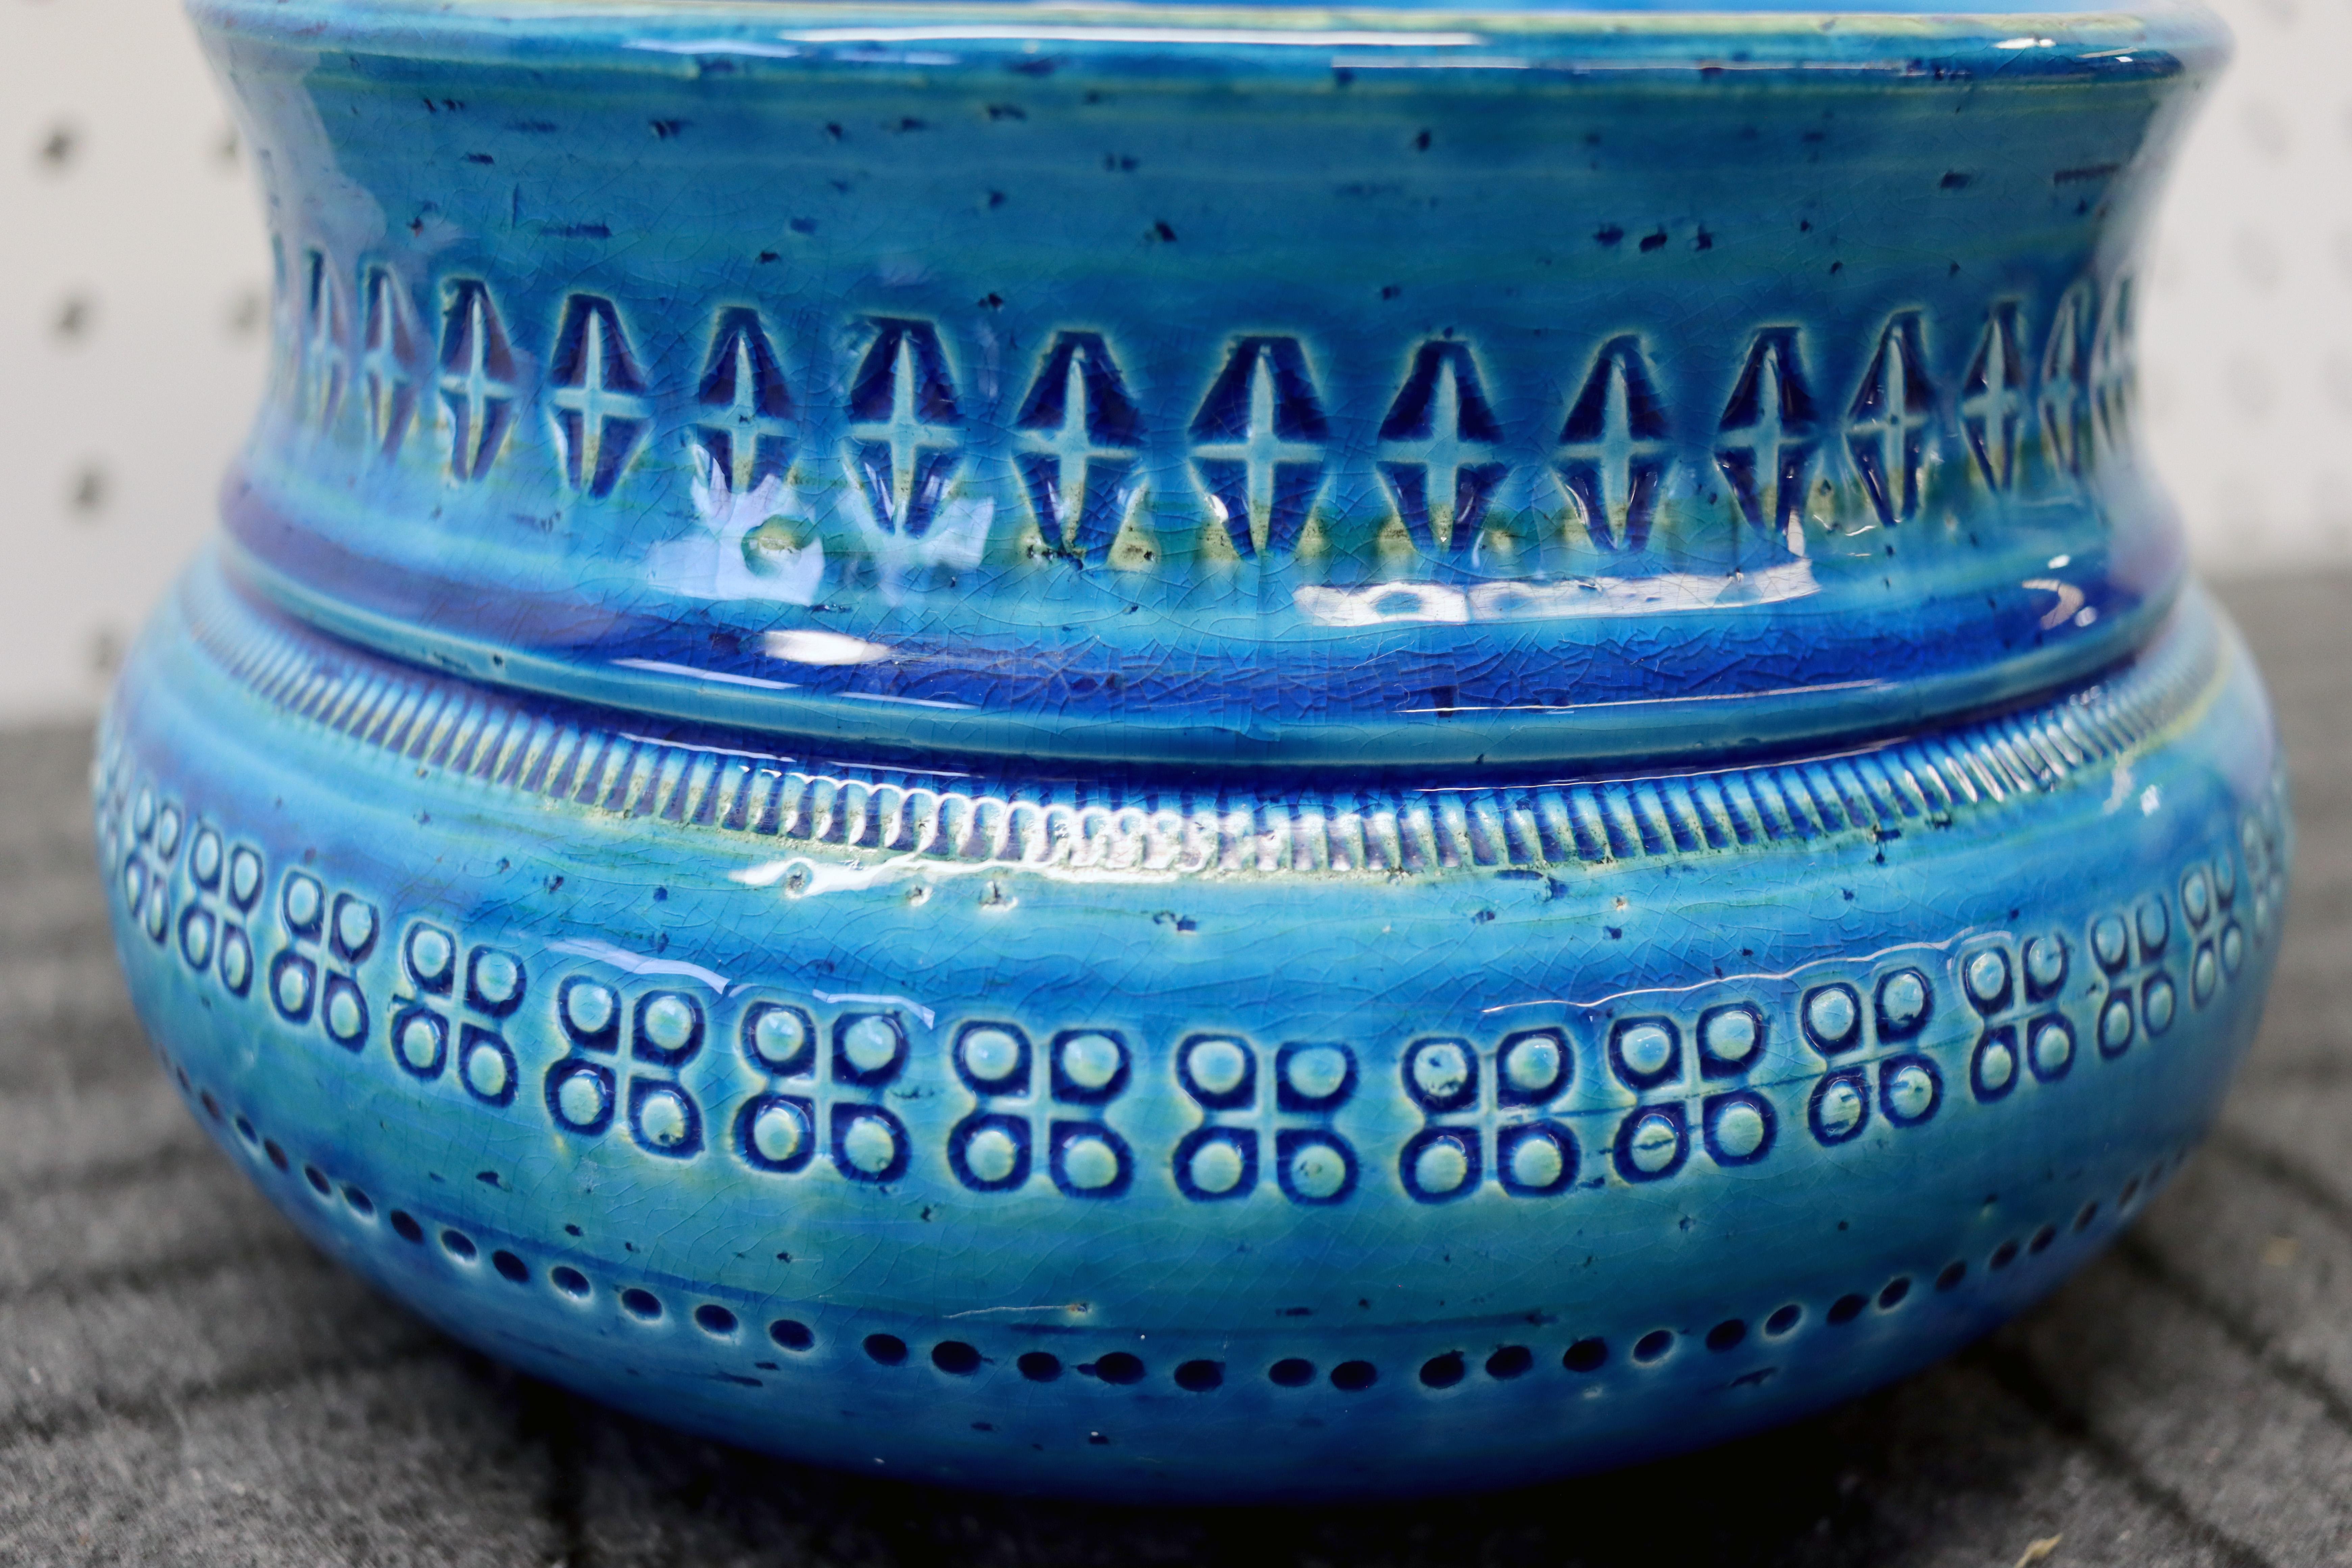 A gorgeous rimini blue bowl by Aldo Londi for Flavia. Marked with Flavia imprint. Aldo Londi's ceramics are a classic of mid-century modern design, and this is a fine example of his work. Measures 8.25” diameter x 5” tall.

Founded in 1921 by